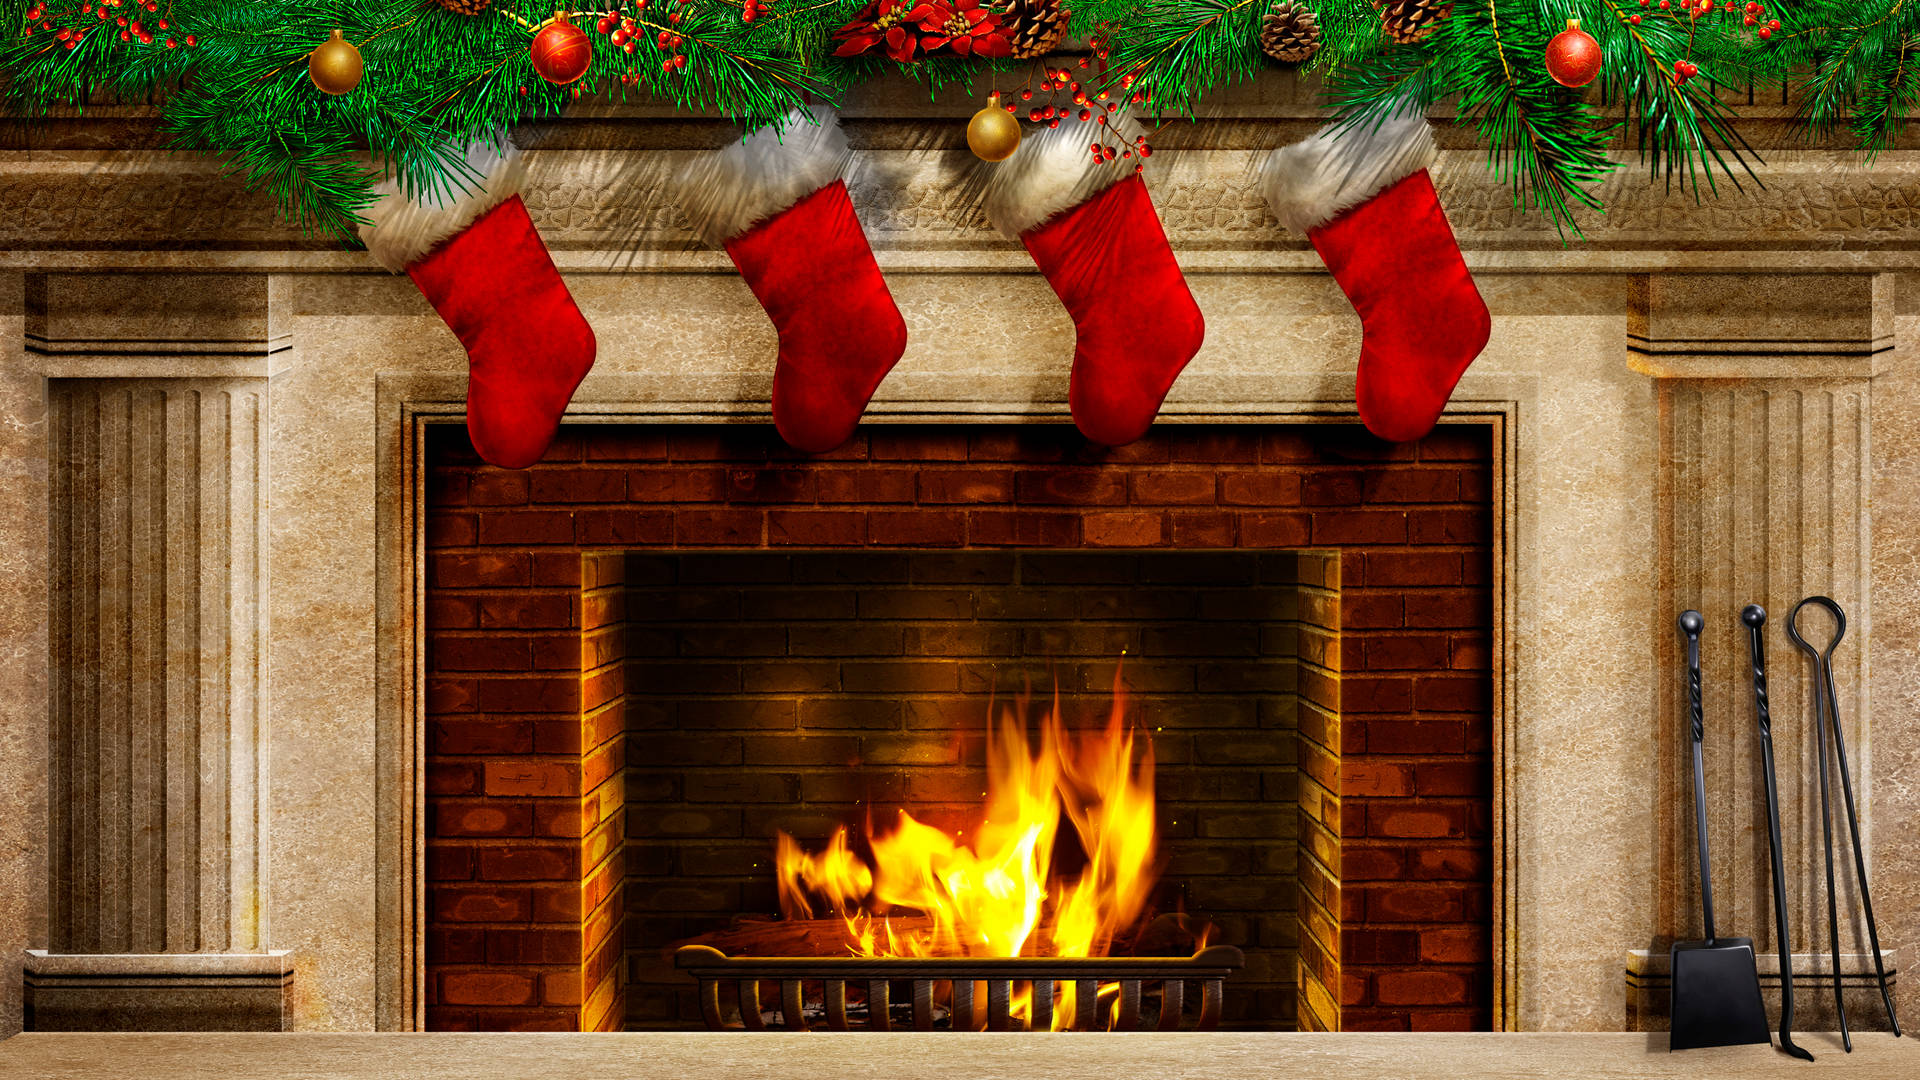 Fireplace With Beautiful Christmas Stockings Background